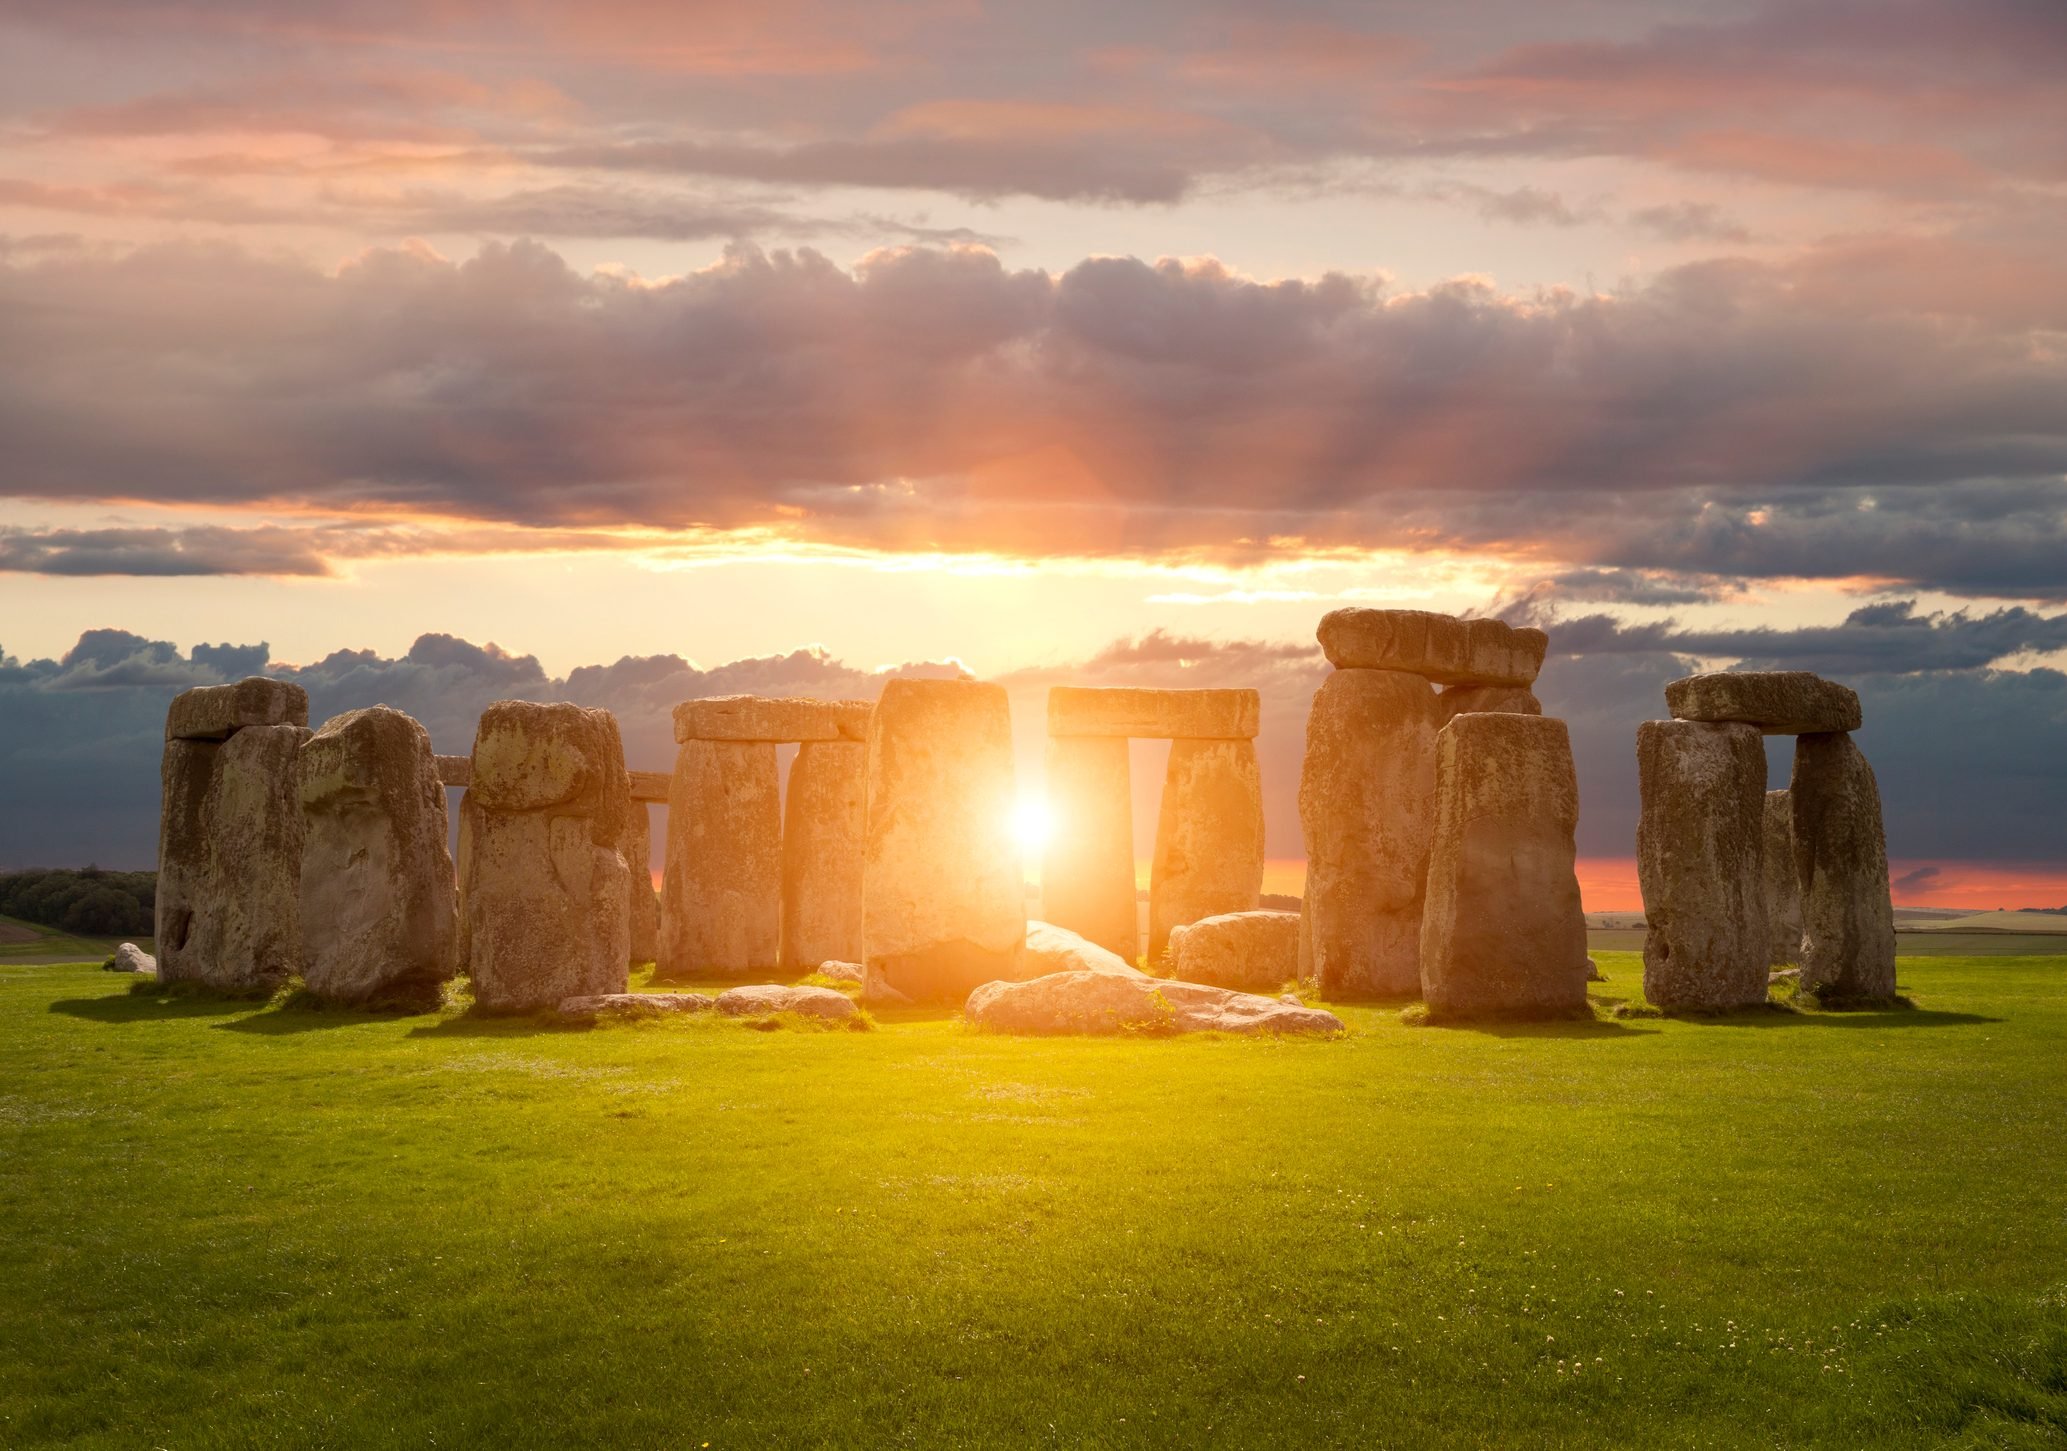 Ancient Monuments Built Around the Summer Solstice Reader's Digest